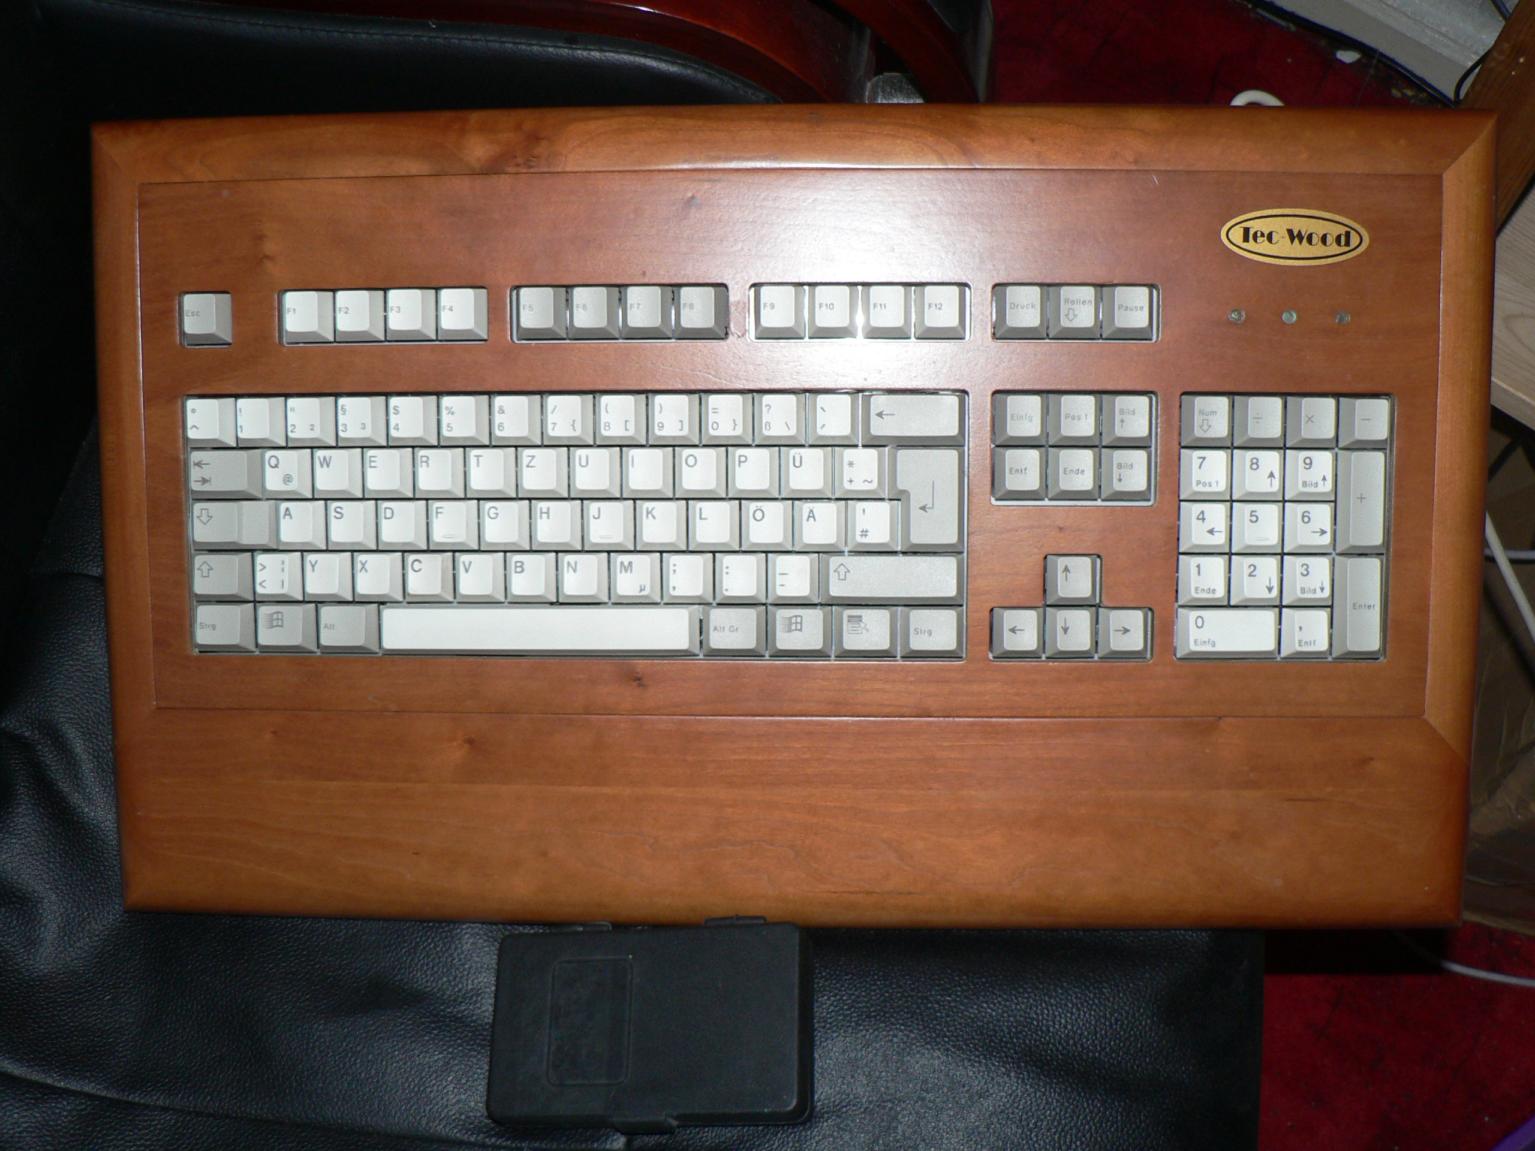 oh lookie a neat keyboard! I wonder what switches it uses?